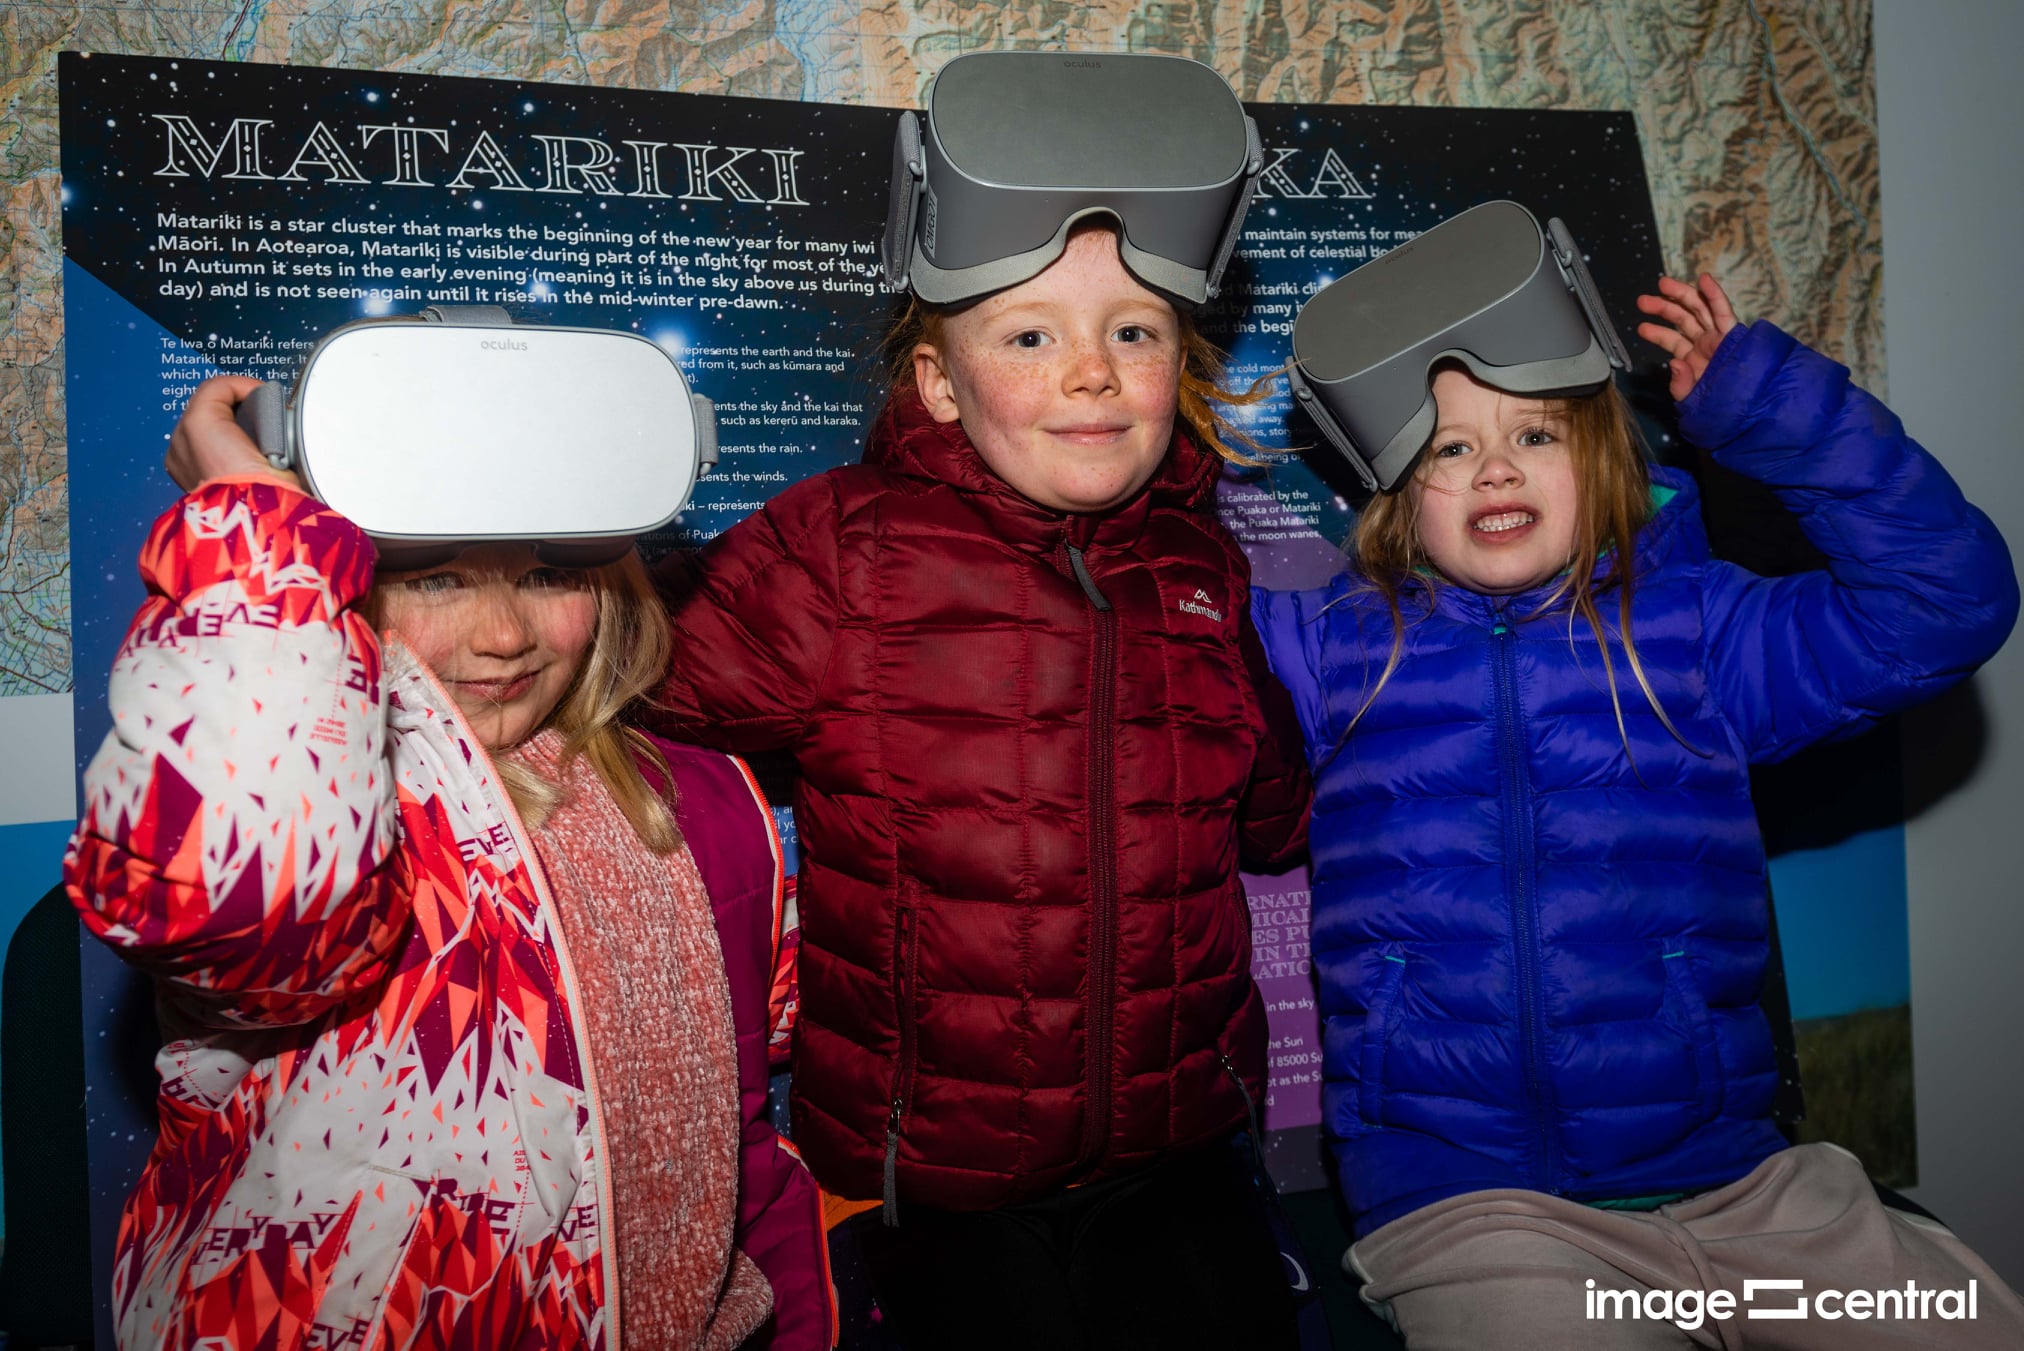 Trying out the VR headsets - Matariki Celebration in Alexandra 2021 - Photo by Clare Toia-Bailey